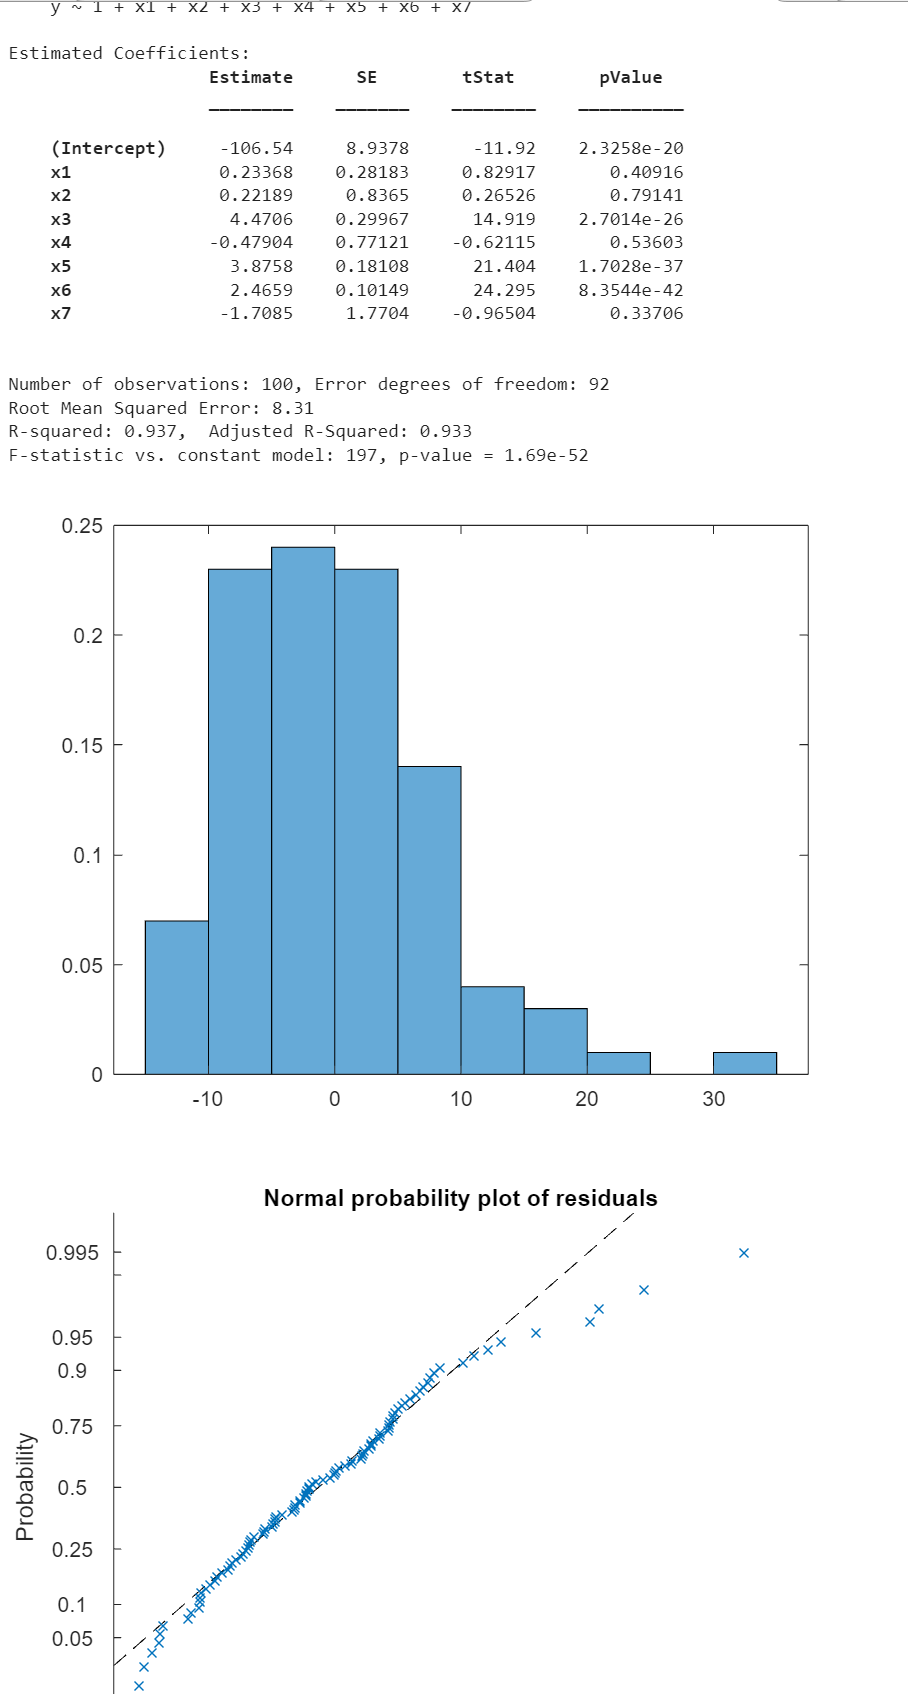 Probability
y 1x1 + x2 + x3 + x4 + x5 + X6 + x/
Estimated Coefficients:
Estimate
SE
tStat
pValue
x2
x3
x5
x6
x7
X X X X X X X F
(Intercept)
-106.54
8.9378
x1
0.23368
0.28183
-11.92
0.82917
2.3258e-20
0.40916
0.22189
0.8365
0.26526
0.79141
4.4706
0.29967
x4
-0.47904
0.77121
14.919
-0.62115
2.7014e-26
0.53603
3.8758
0.18108
21.404
1.7028e-37
2.4659
-1.7085
0.10149
1.7704
24.295
-0.96504
8.3544e-42
0.33706
Number of observations: 100, Error degrees of freedom: 92
Root Mean Squared Error: 8.31
R-squared: 0.937, Adjusted R-Squared: 0.933
F-statistic vs. constant model: 197, p-value = 1.69e-52
0.25
0.2
0.15
0.1
0.05
T
0
-10
0
10
20
20
0.995
Normal probability plot of residuals
0.95
0.9
0.75
0.5
0.25
0.1
0.05
十
30
50